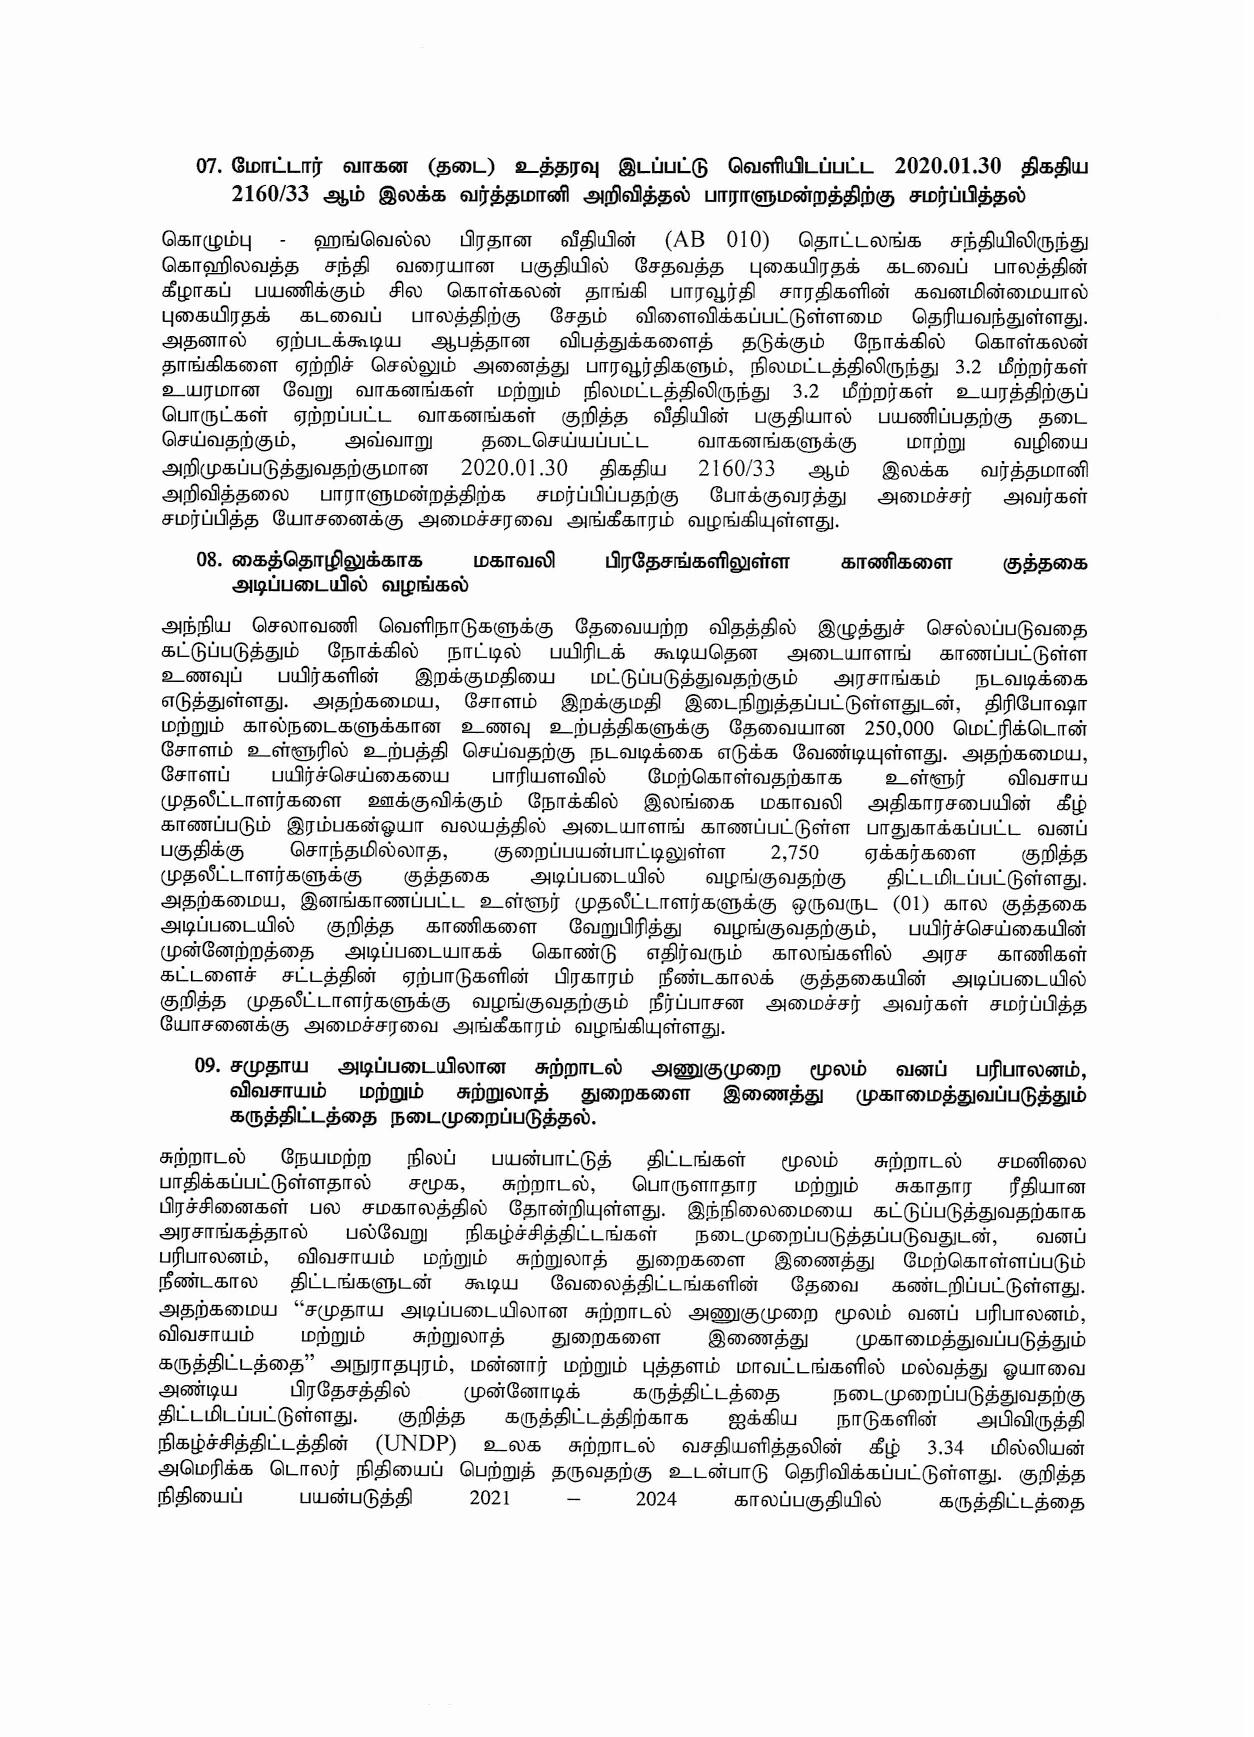 Cabinet Decision on 01.02.2021 Tamil page 003